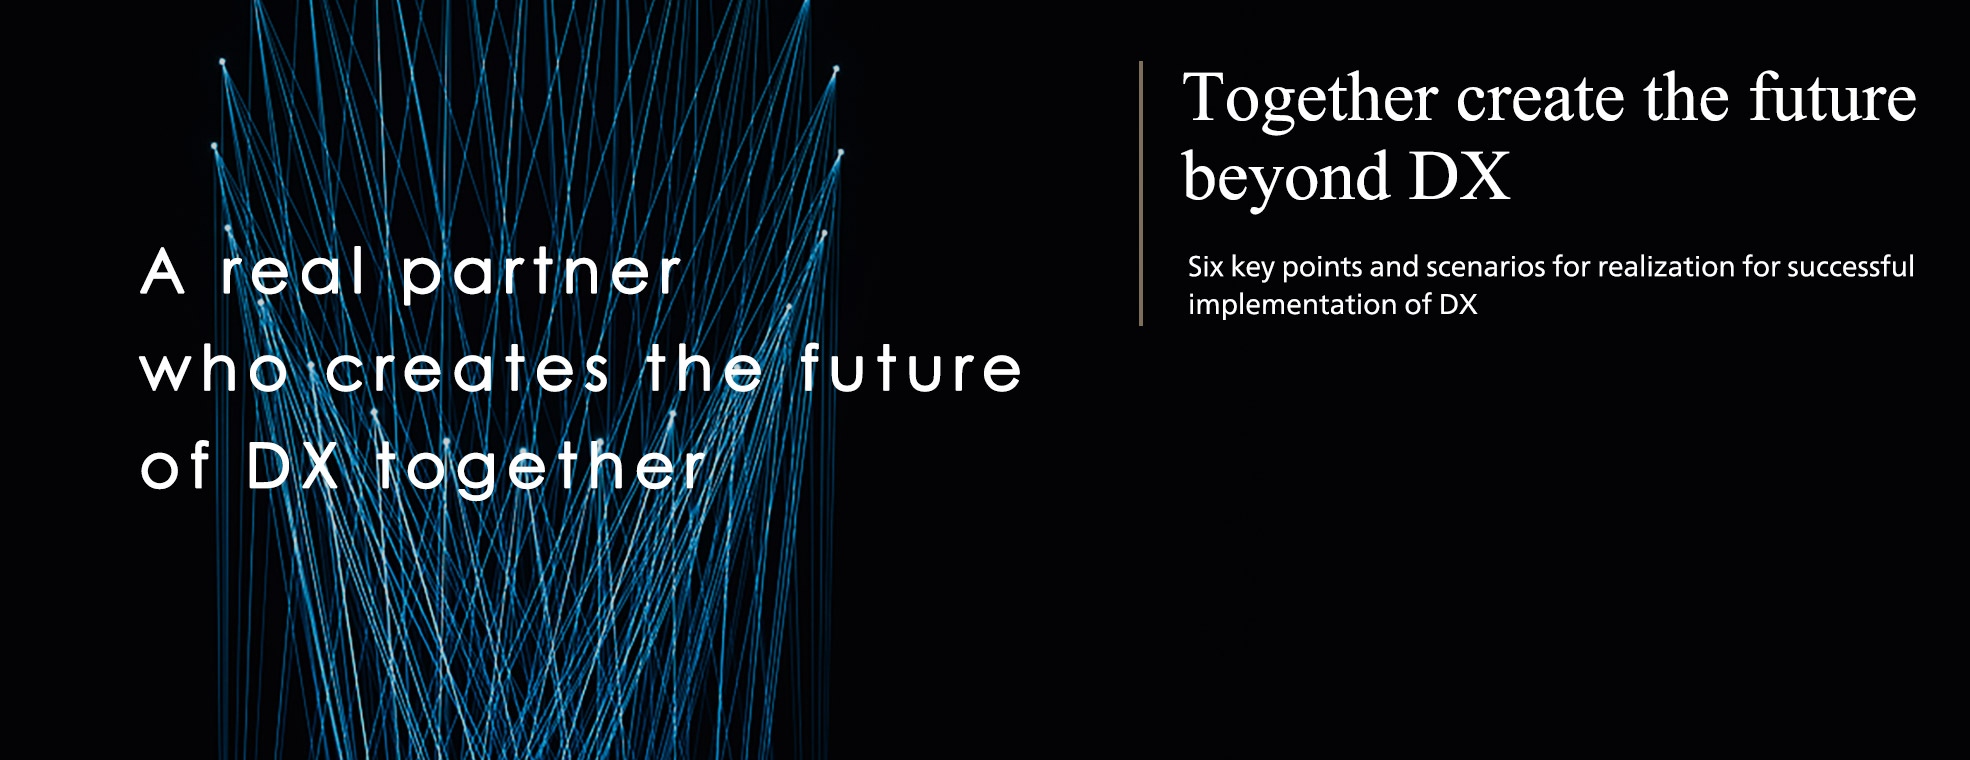 Together create the future beyond DX